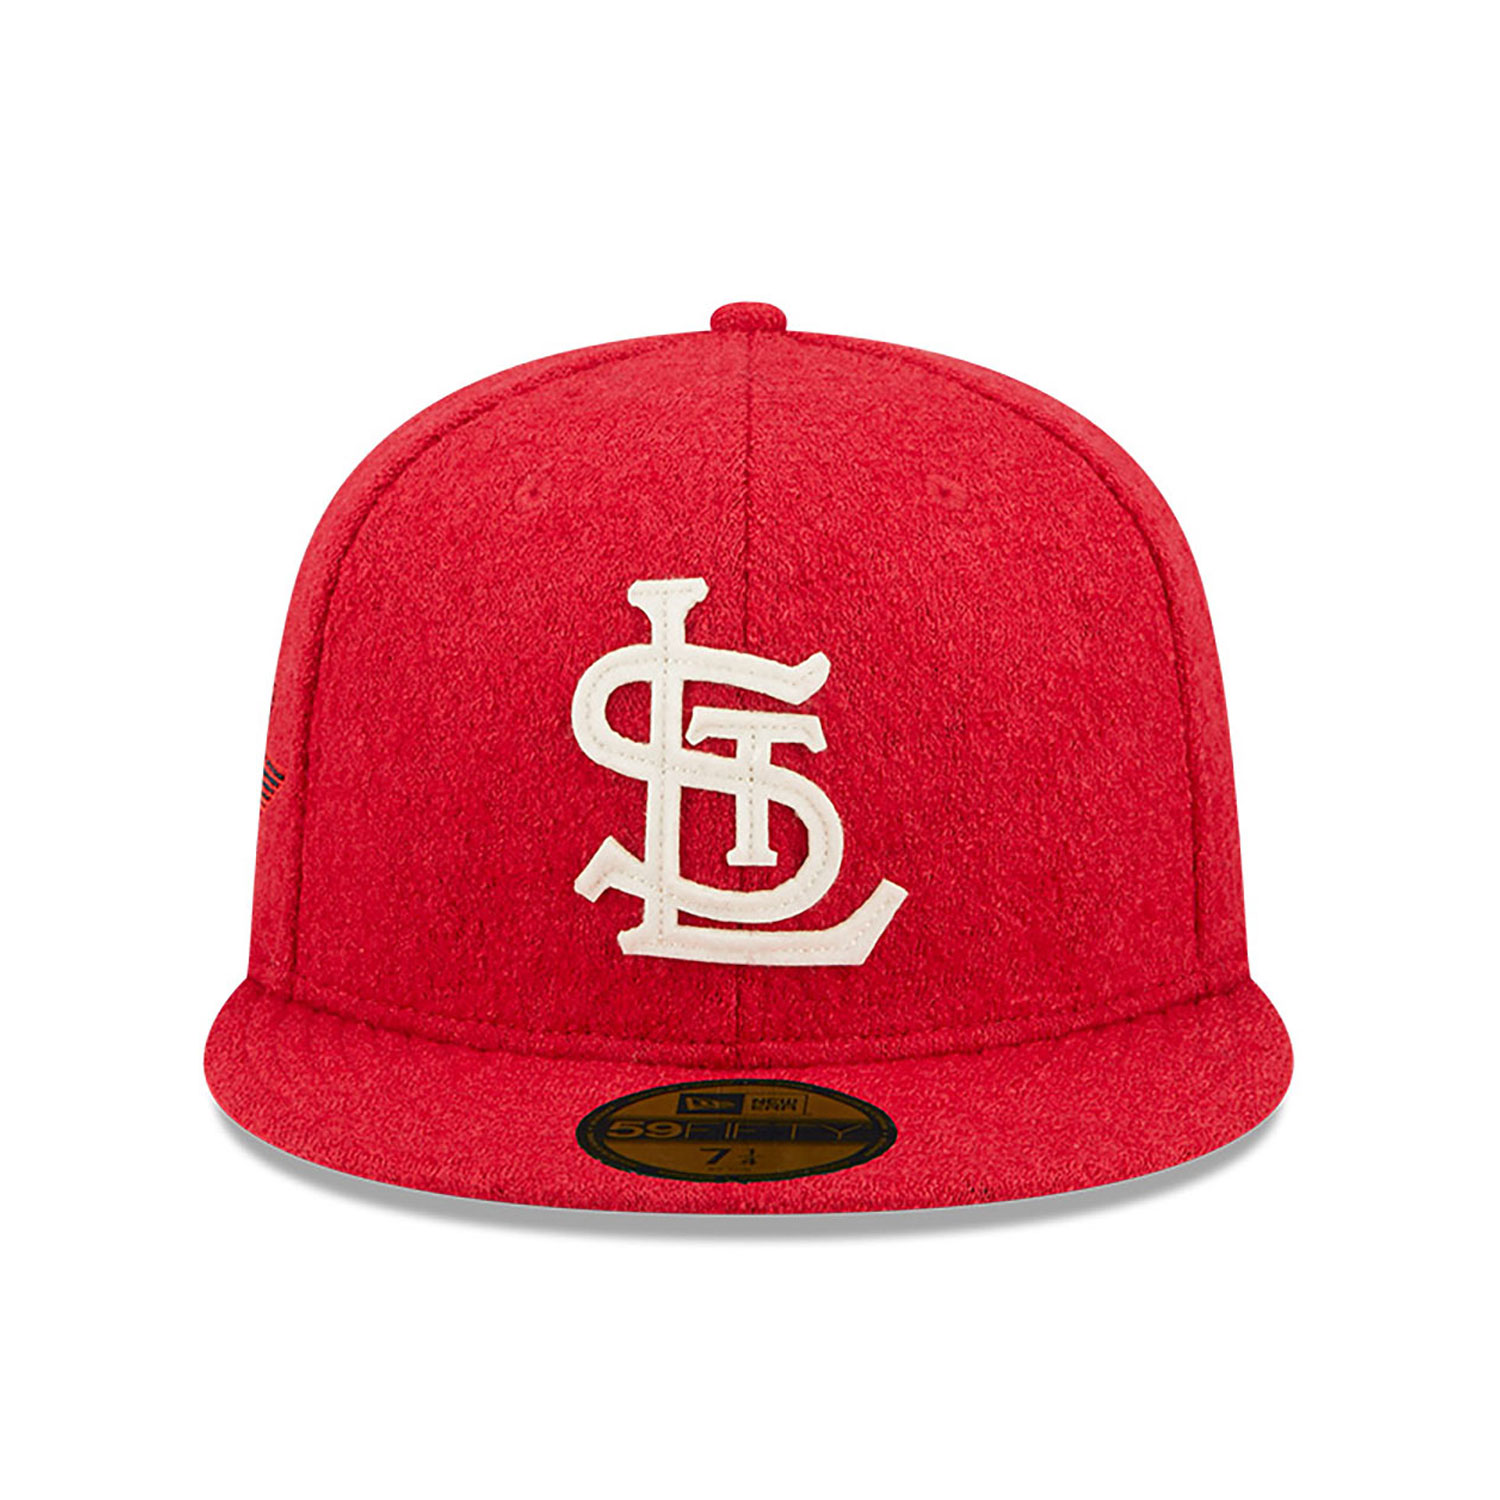 St. Louis Cardinals MLB Cooperstown Red 59FIFTY Fitted Cap